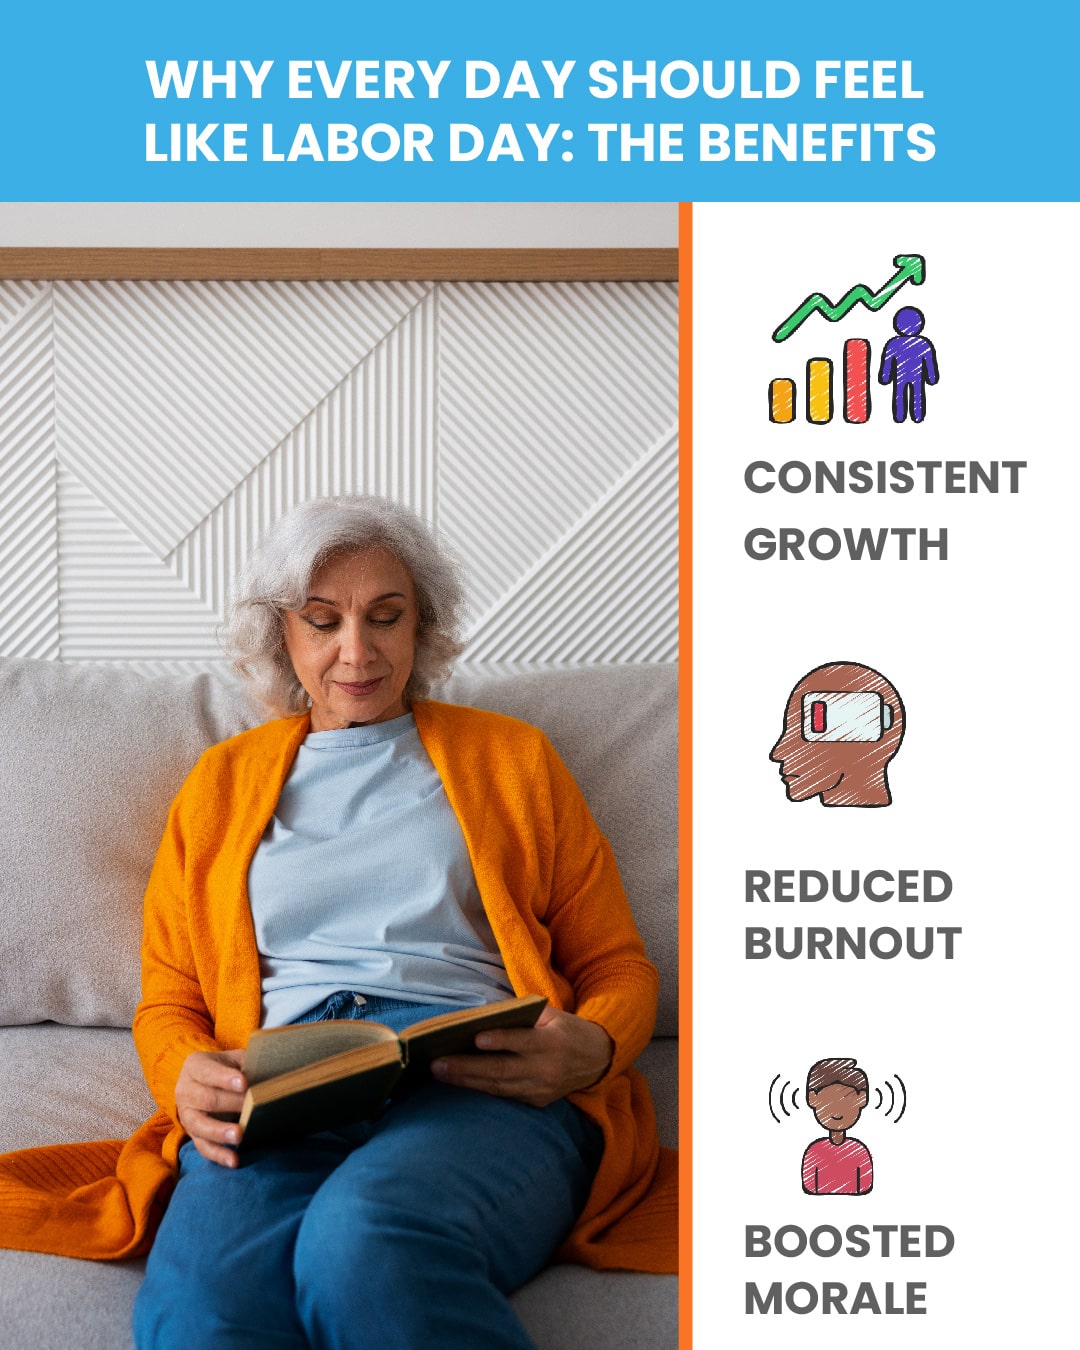 Elderly woman reading a book, with icons for Consistent Growth, Reduced Burnout, and Boosted Morale, illustrating the benefits of Why Every Day Should Feel Like Labor Day